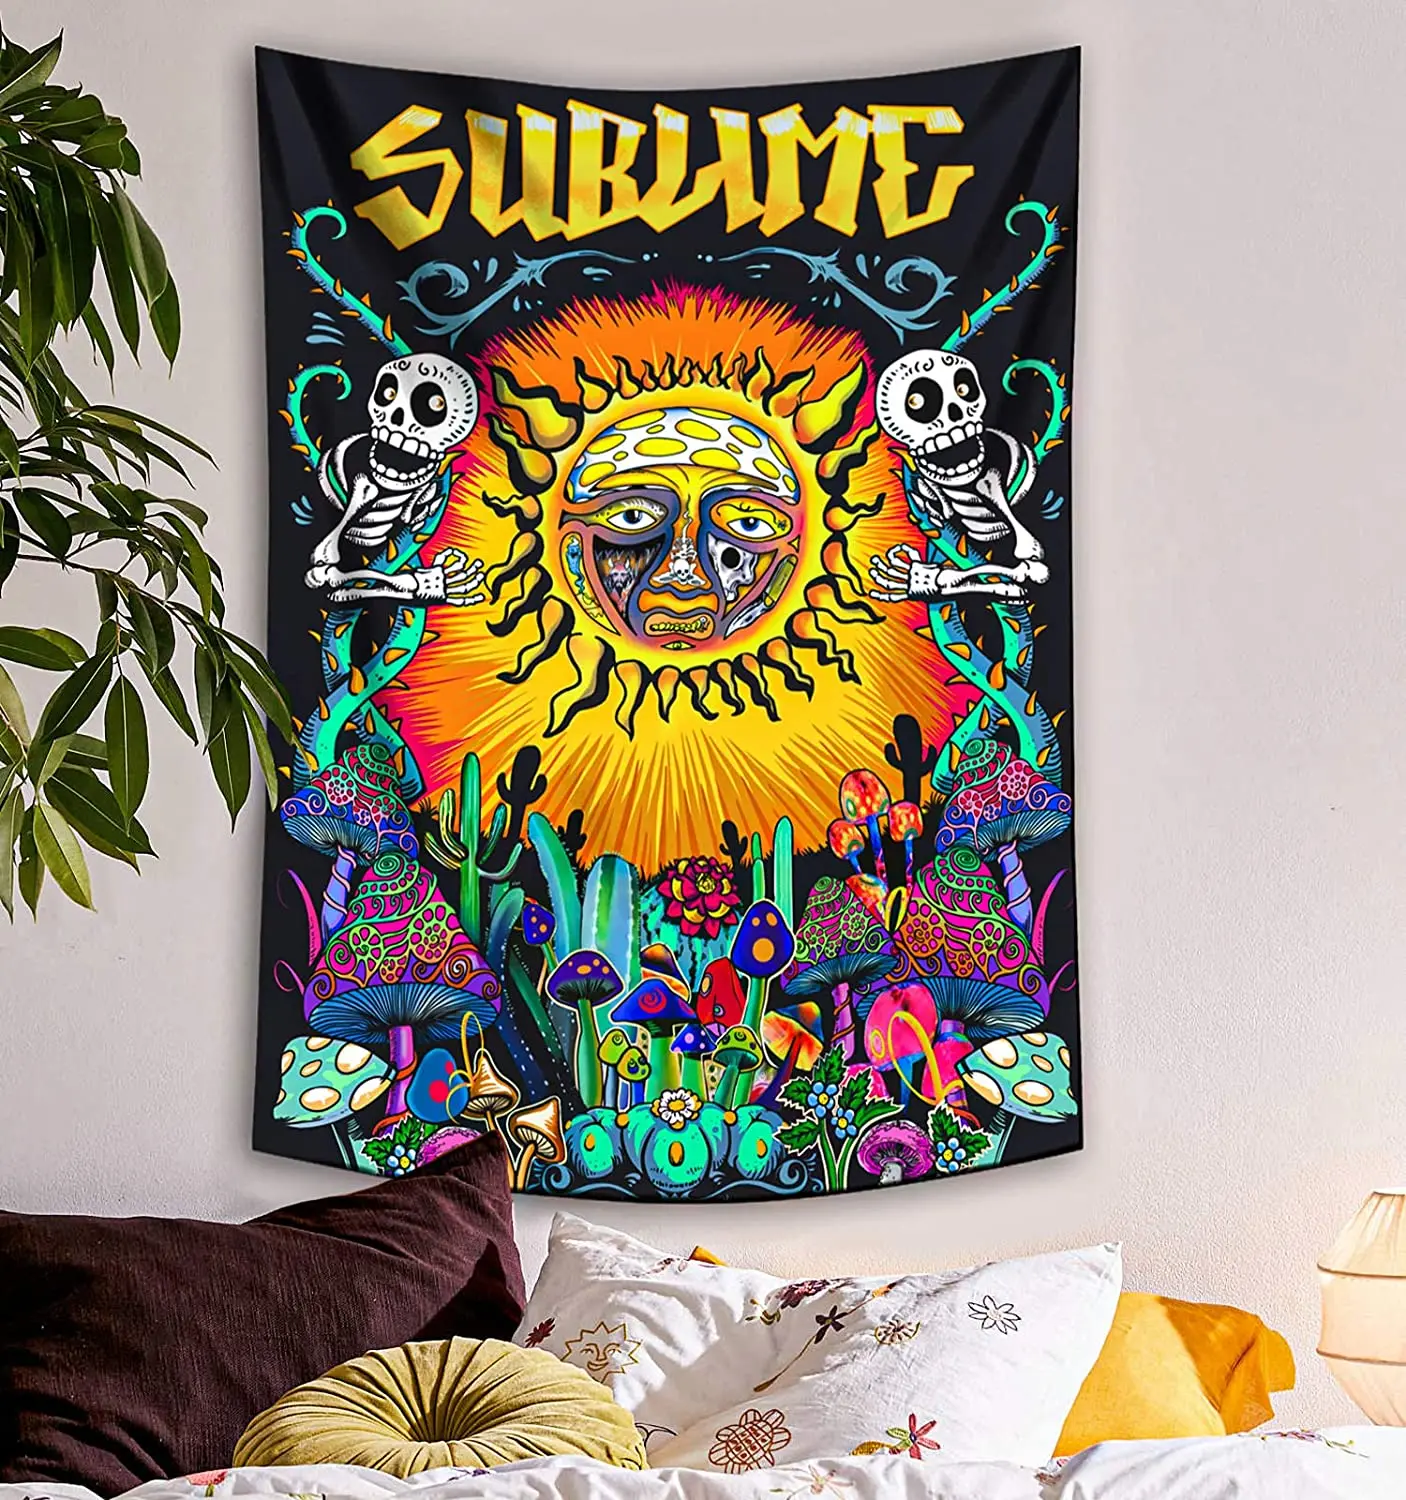 

Trippy Sublime Sun Tapestry Wall Hanging Psychedelic Hippie Vertical Colorful Tapestries with Mushroom Cactus for Home Decor